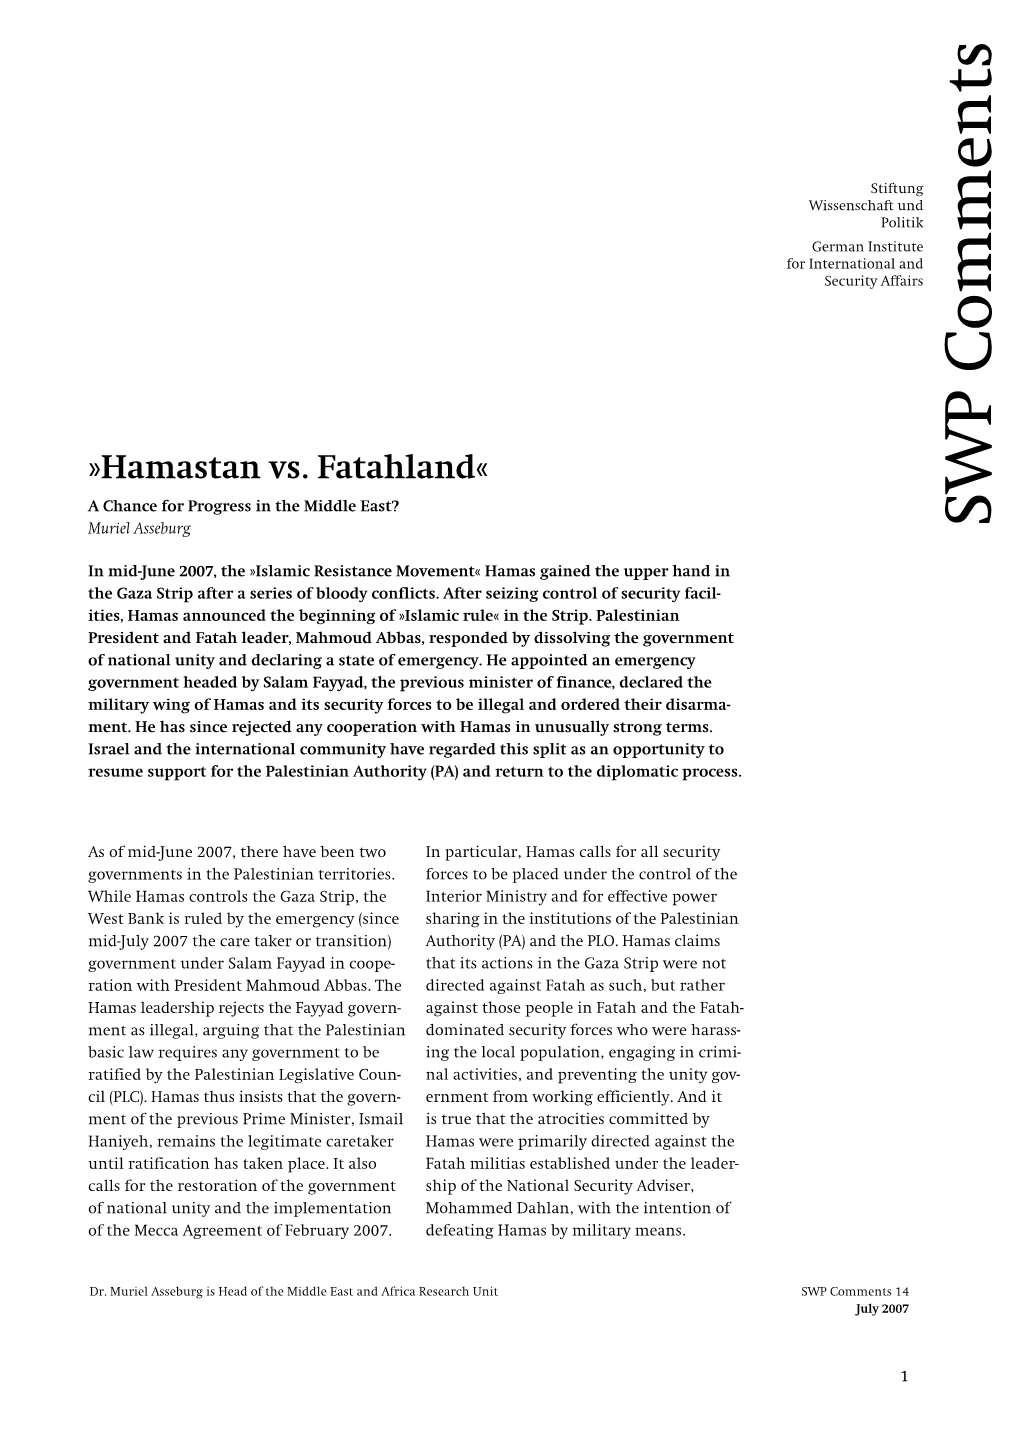 Hamastan Vs. Fatahland« a Chance for Progress in the Middle East?